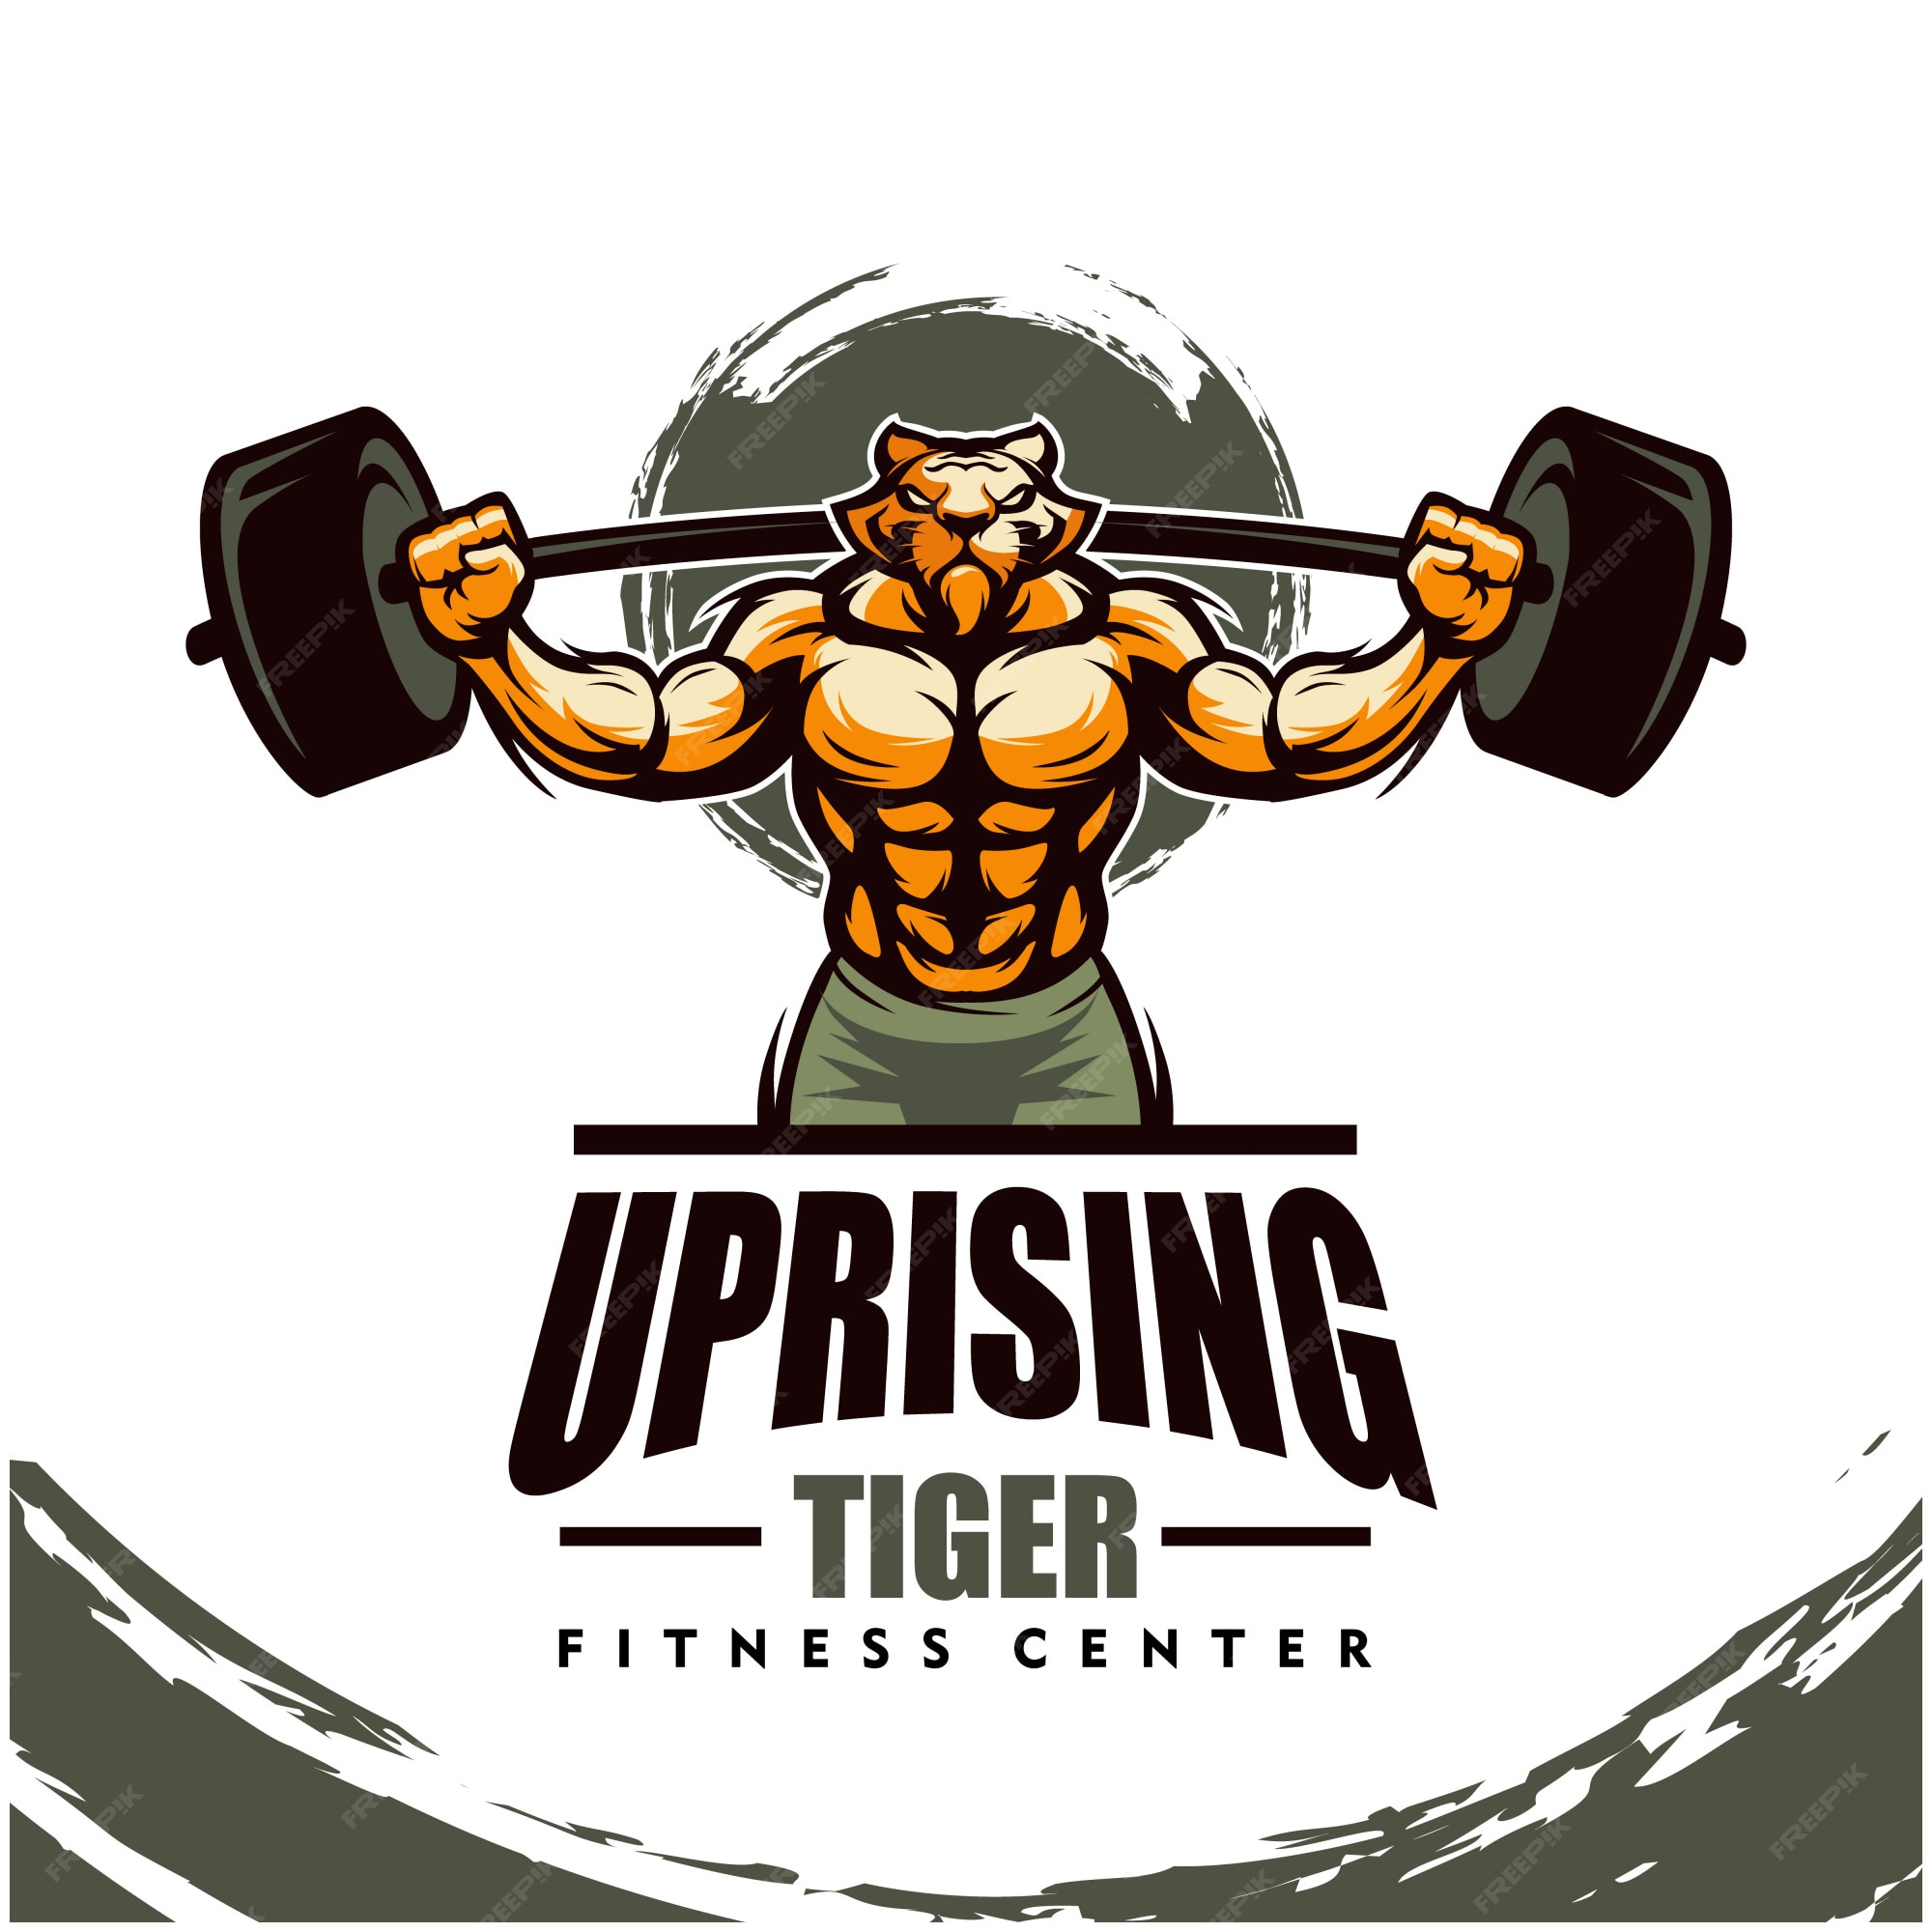 Agrarisch Rijk manipuleren Premium Vector | Tiger with strong body, fitness club or gym logo.